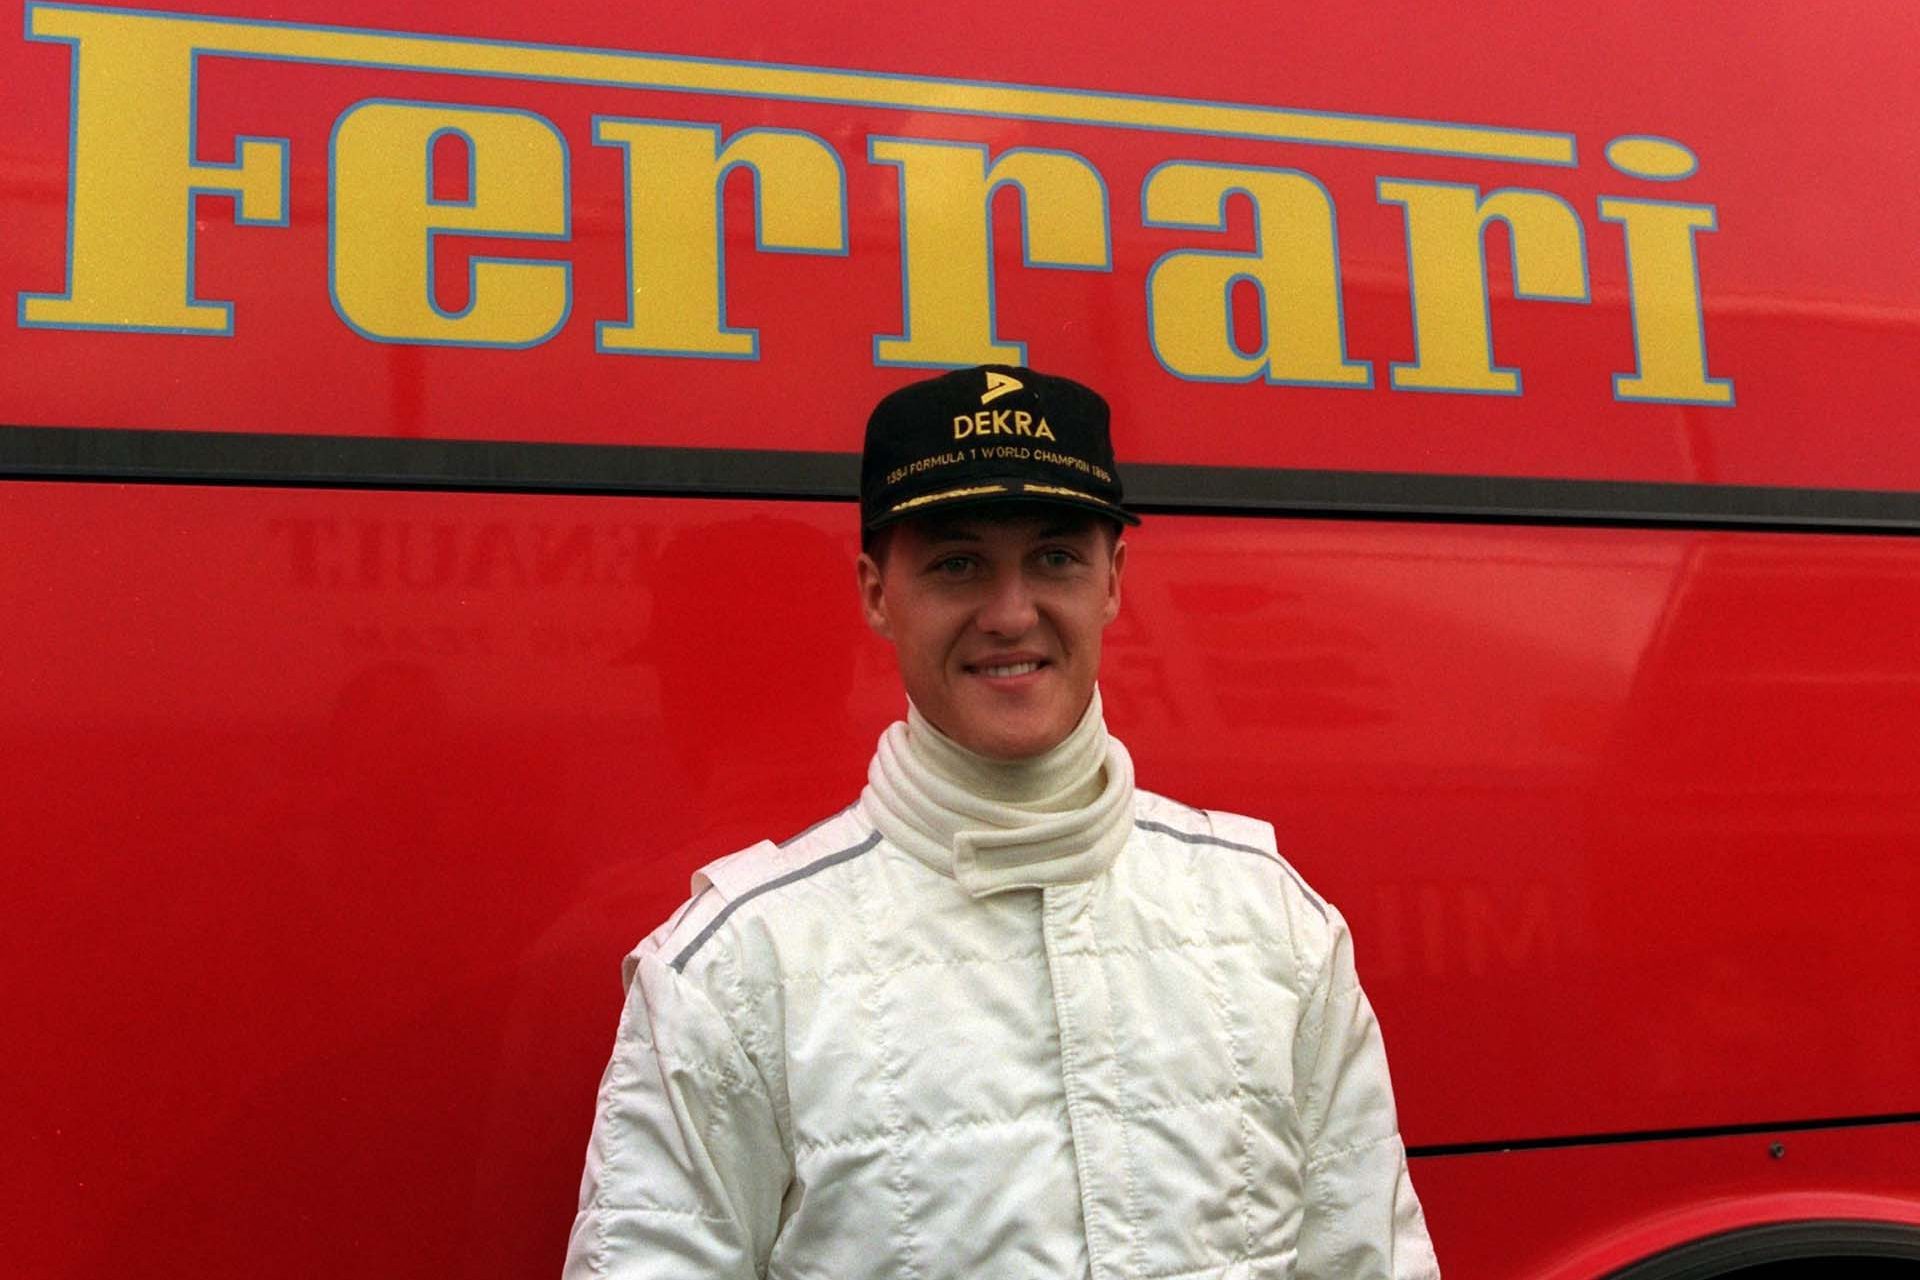 Will we see 'old' Schumacher again?